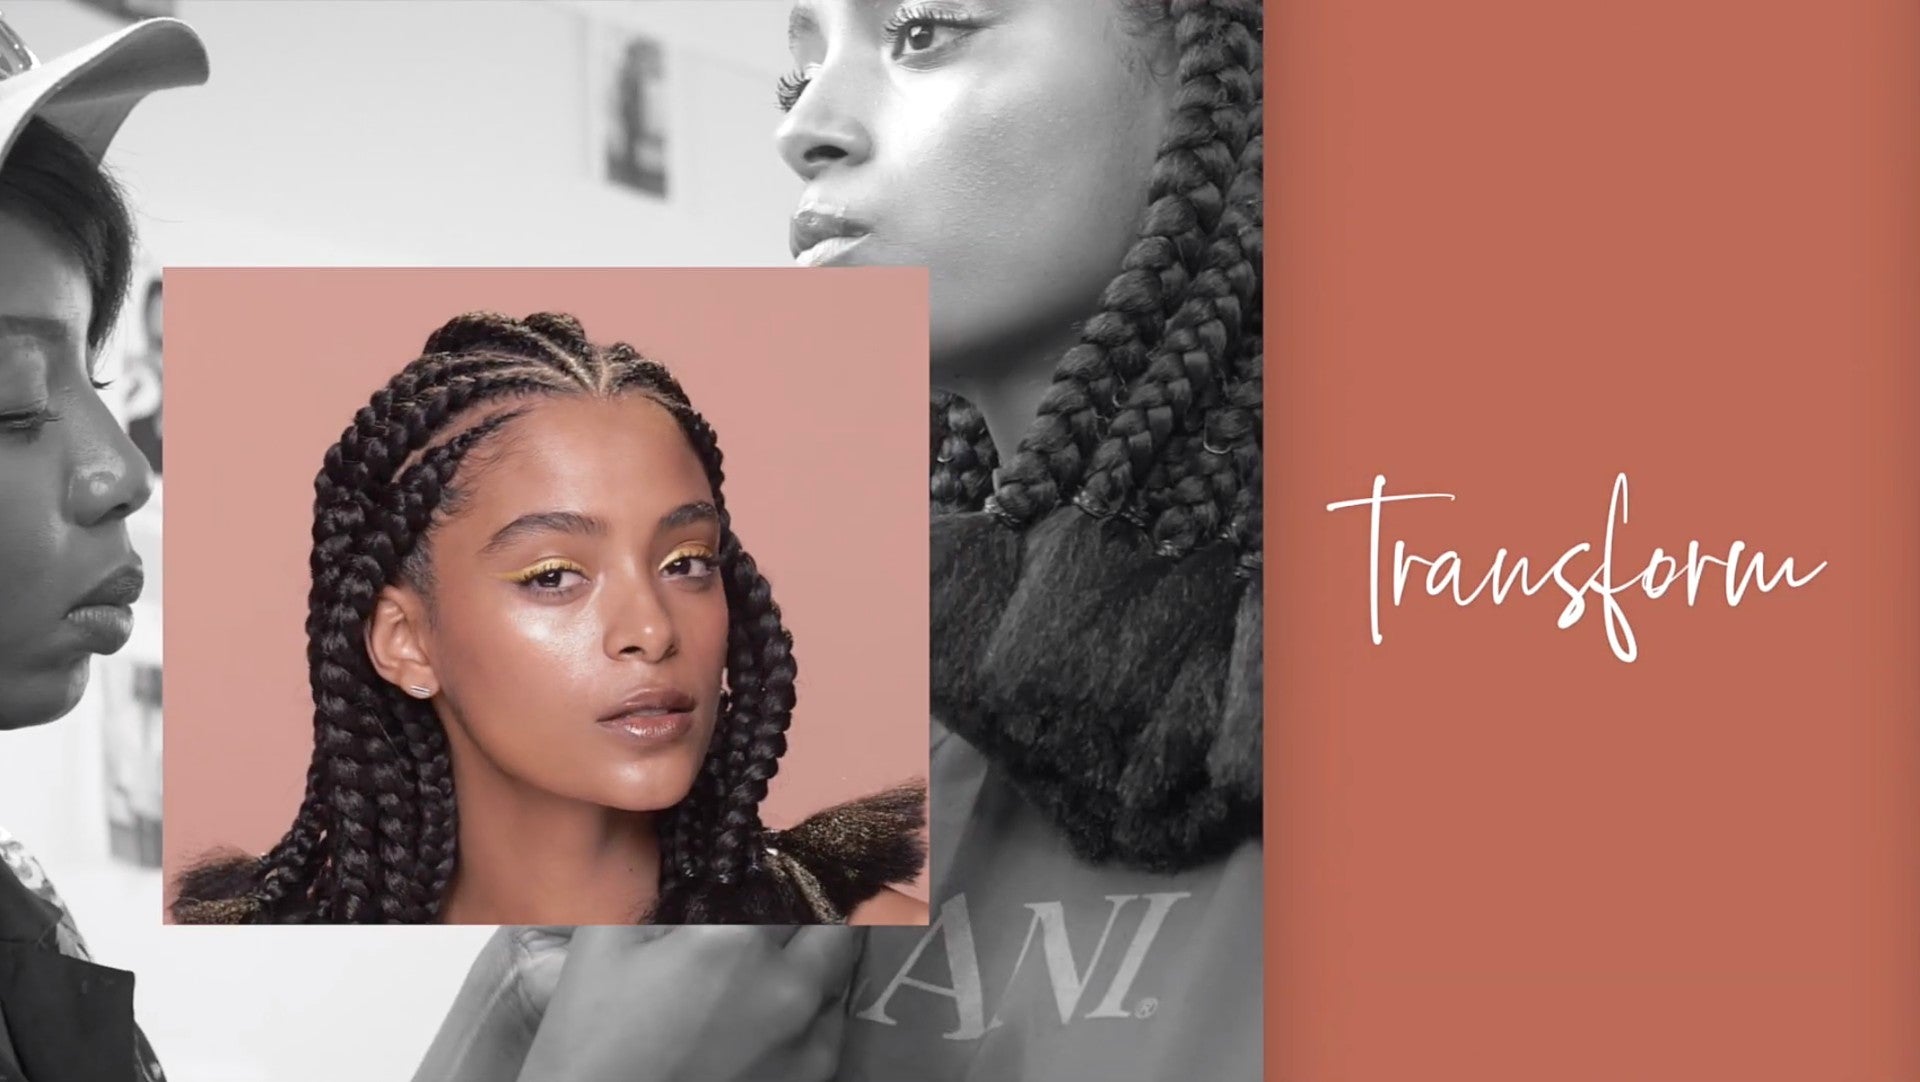 MIZANI’s New Global Campaign Is A Love Letter To All Black Hair Textures